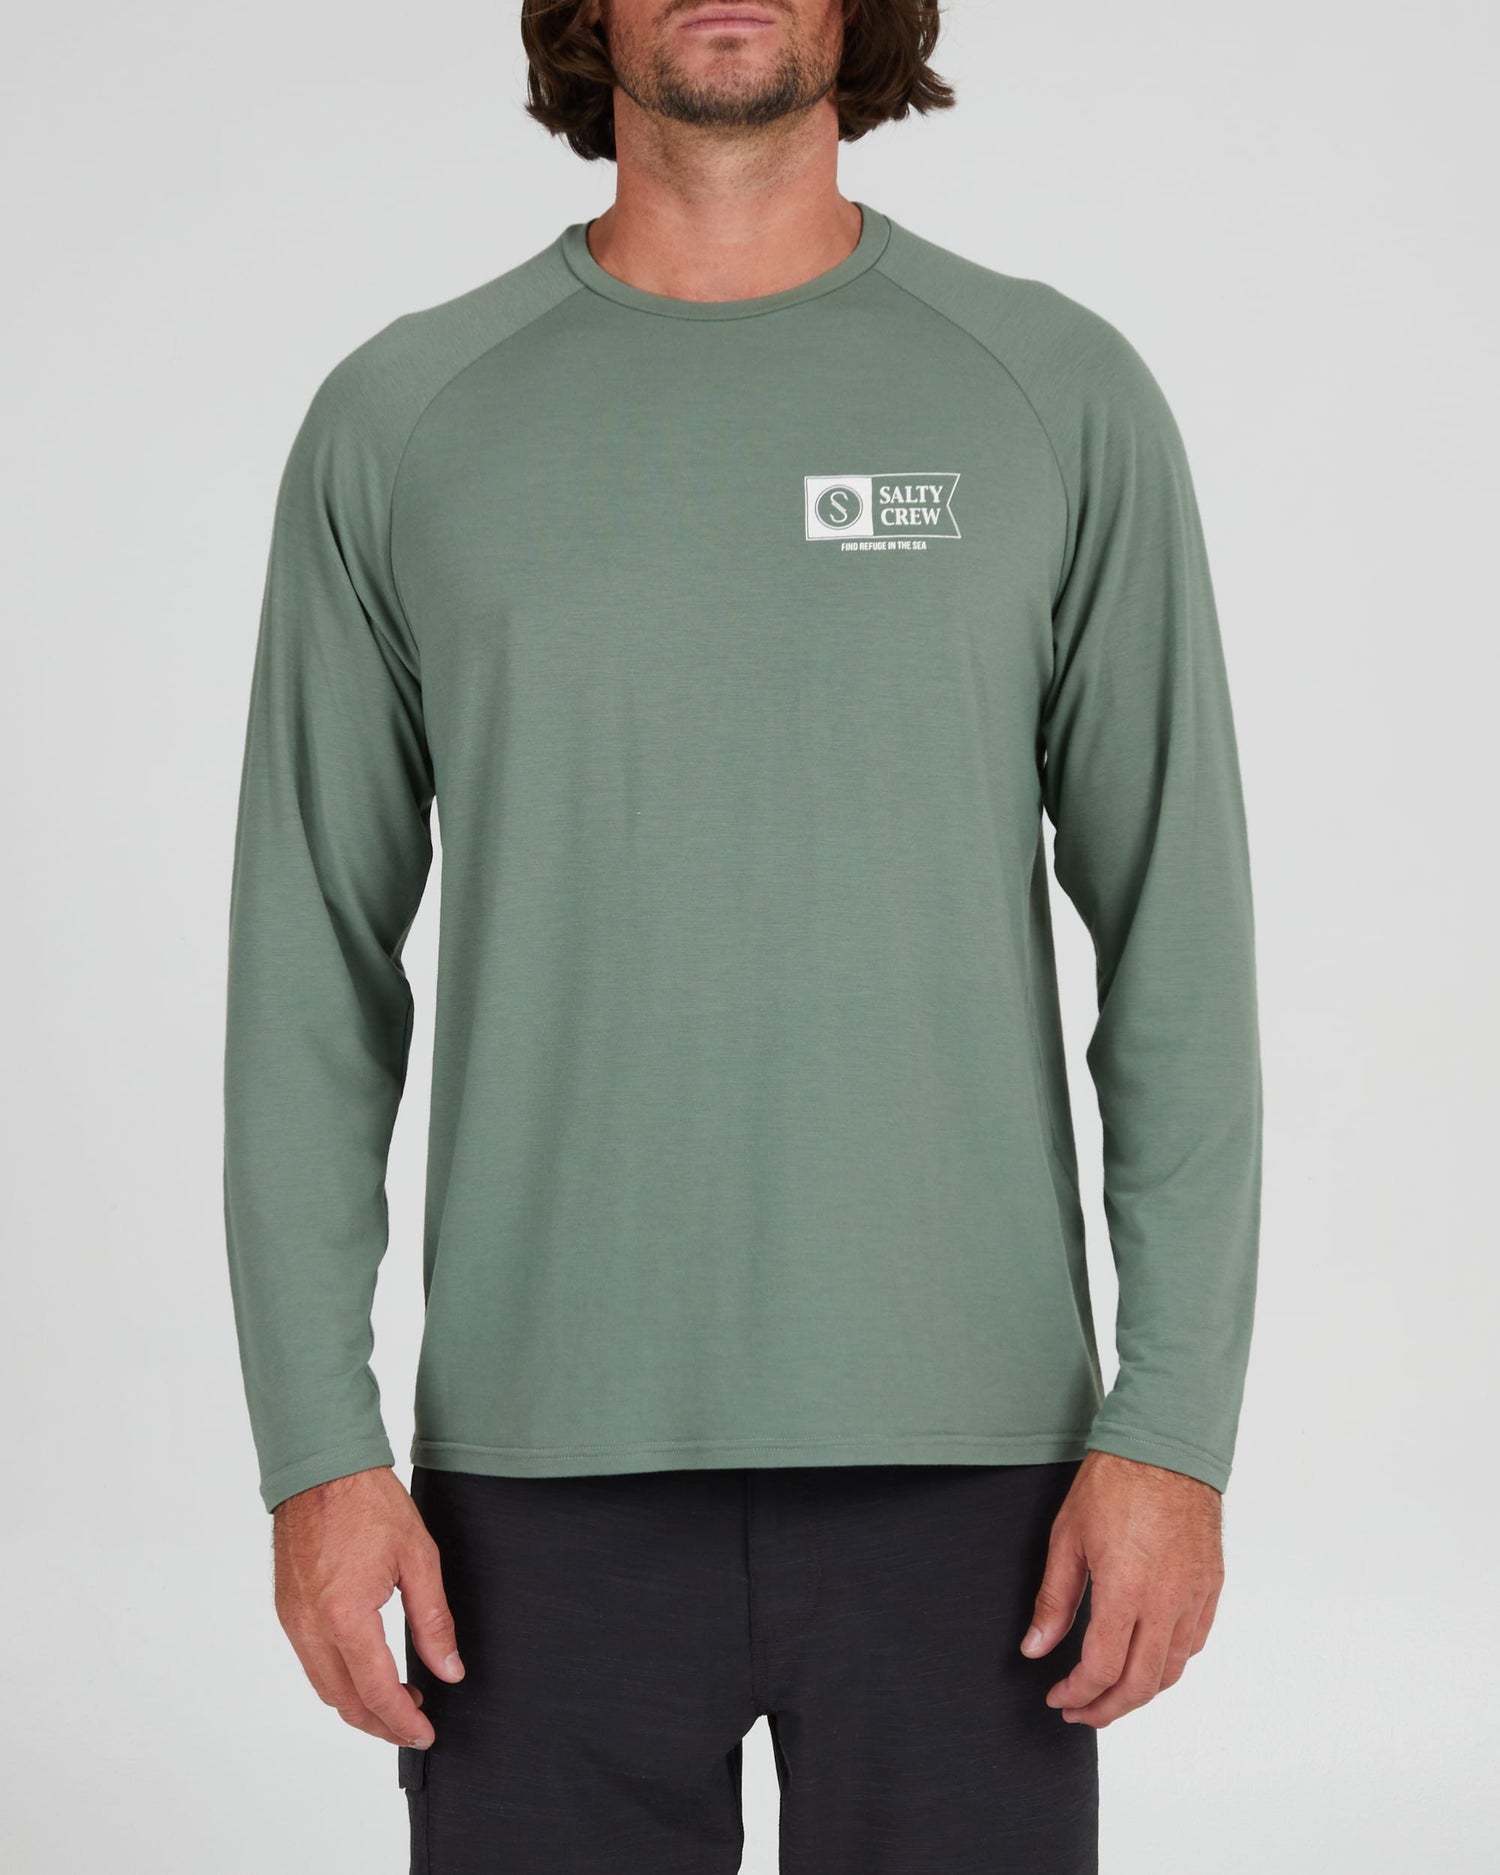 Salty crew SUN PROTECTION MARINER UV L/S - Fatigue in Fatigue